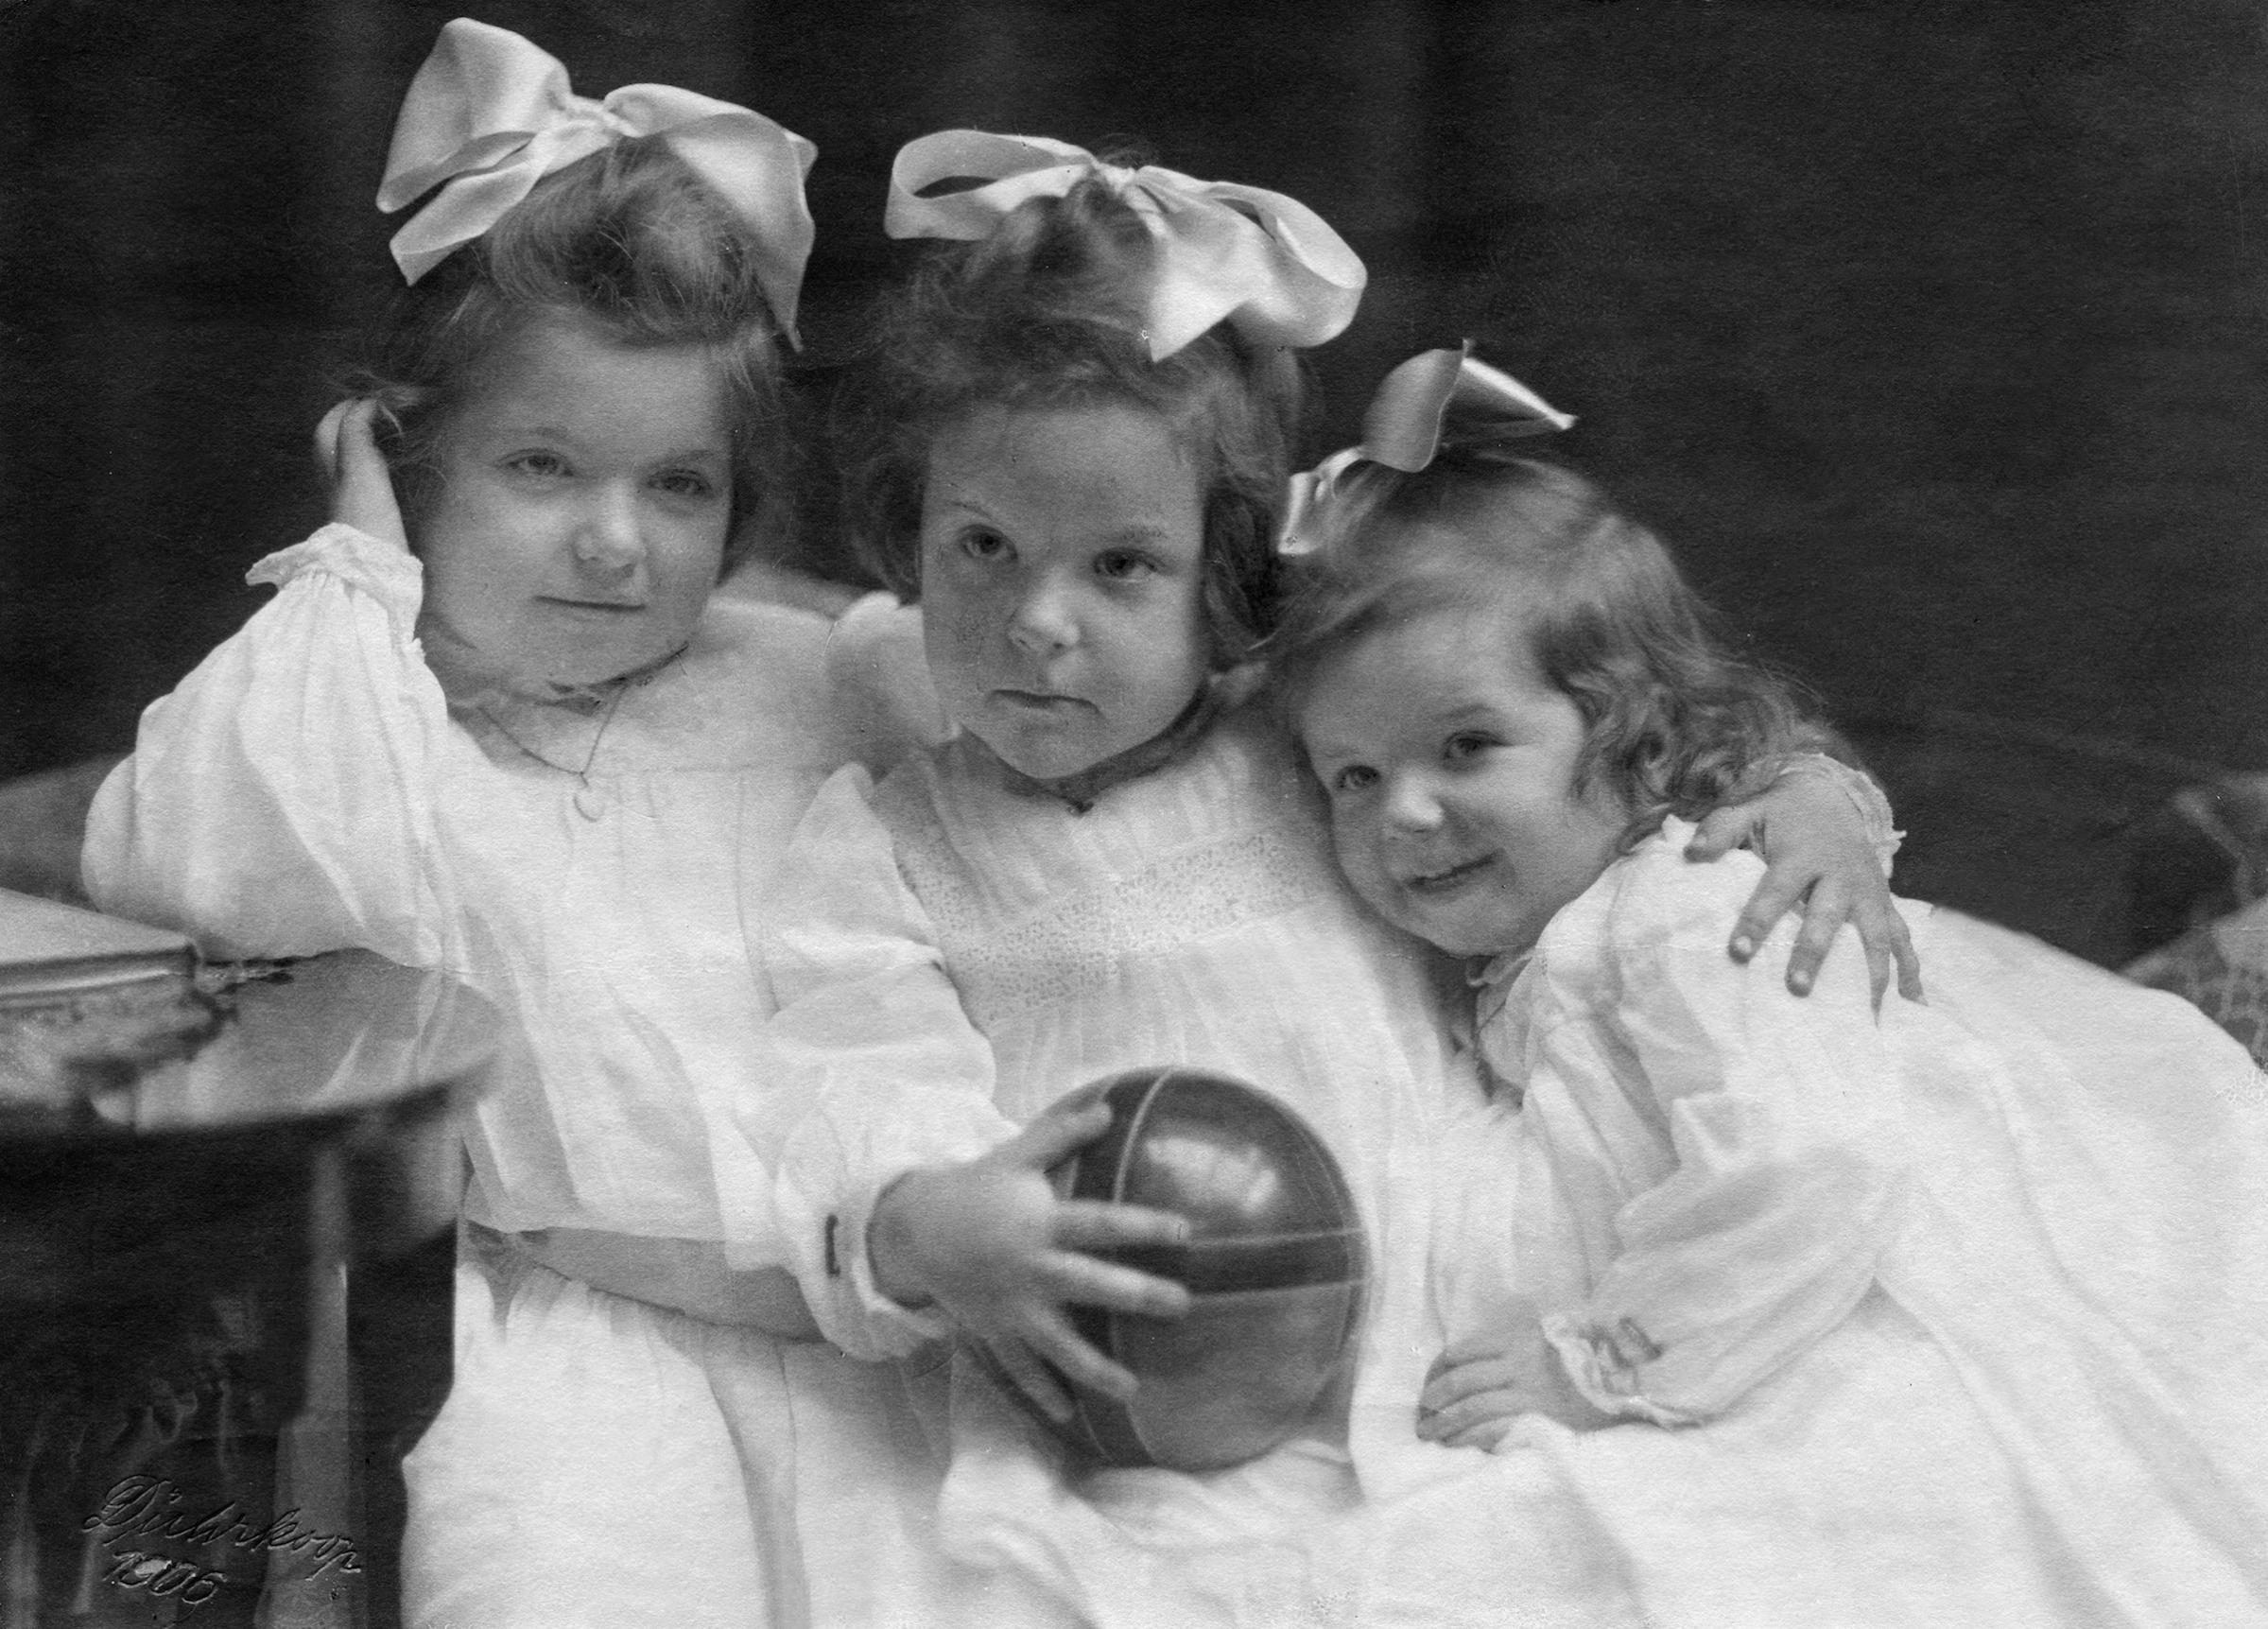 three sisters with hair bow- 1906- Photographer: Rudolph DuehrkoopVintage property of ullstein bild